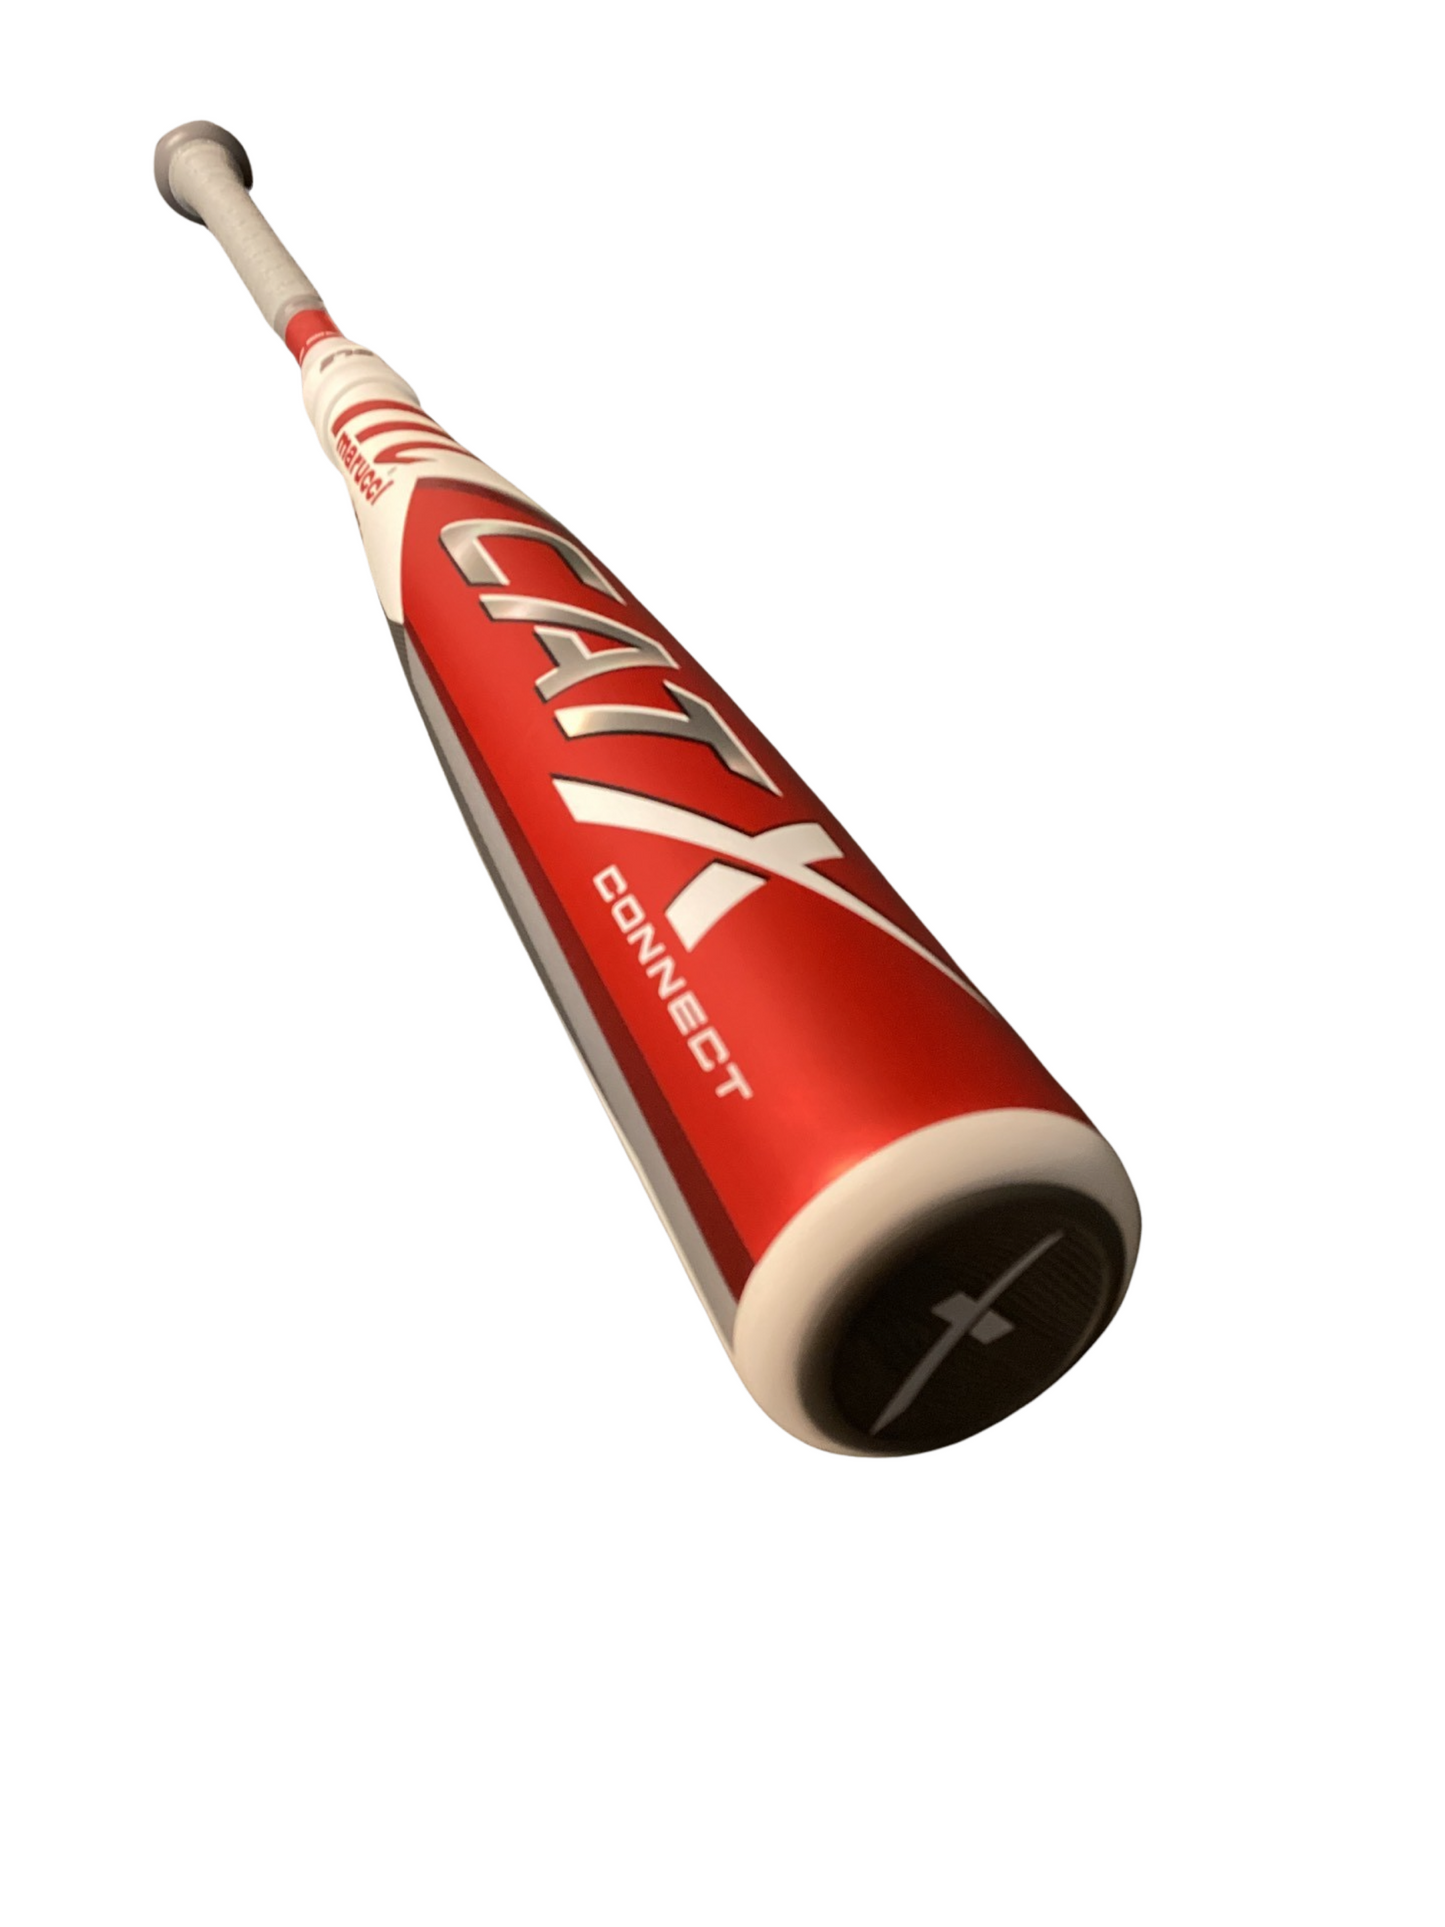 2023 Marucci CATX Connect 32"24oz. (-8) 2 3/4" Baseball Bat Out of Wrapper